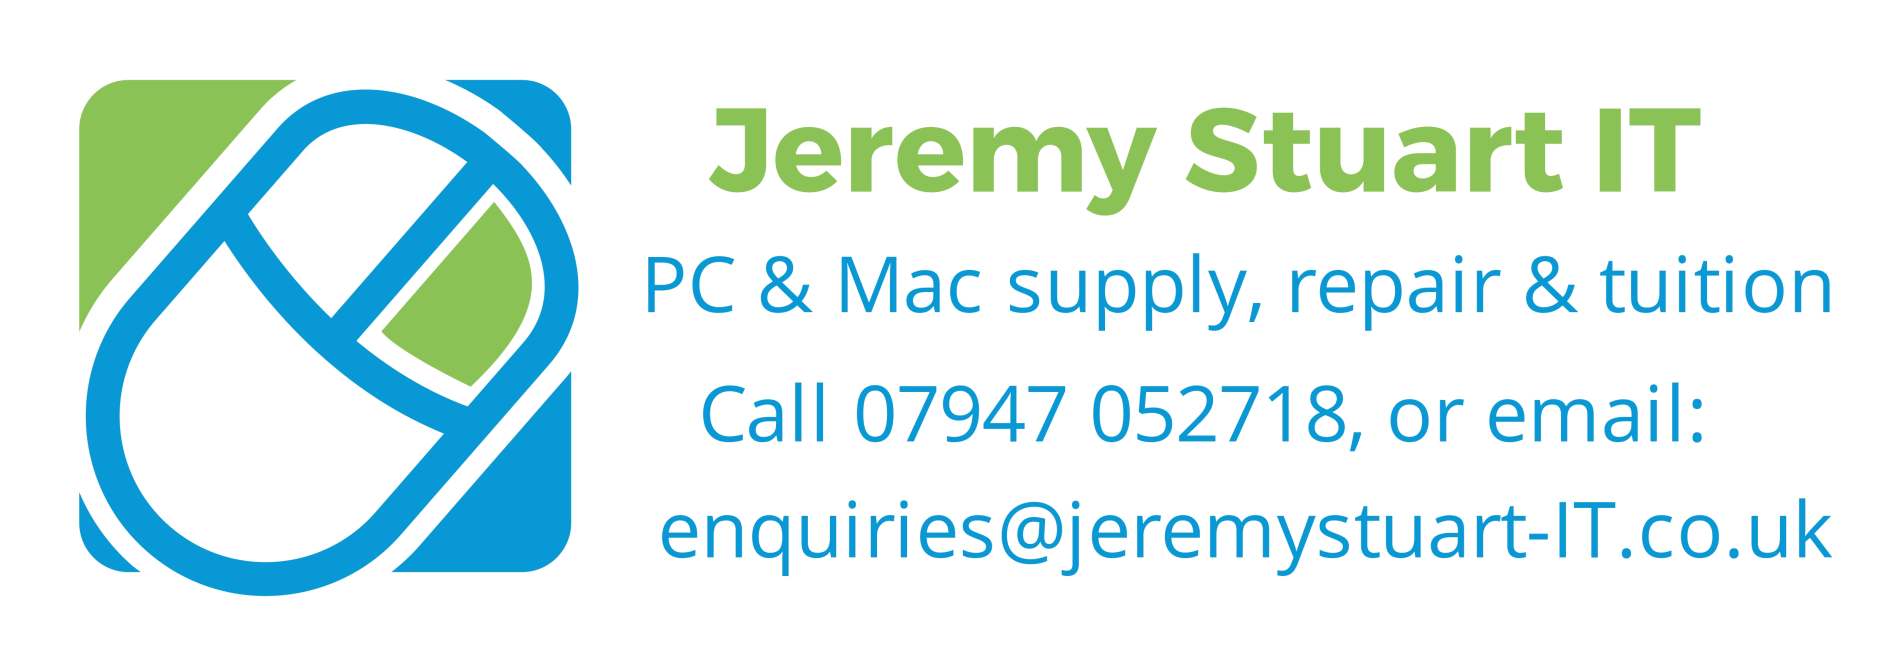 Affordable PC repairs | Pc/Laptop/Tablet Sales, Repairs & Tuition